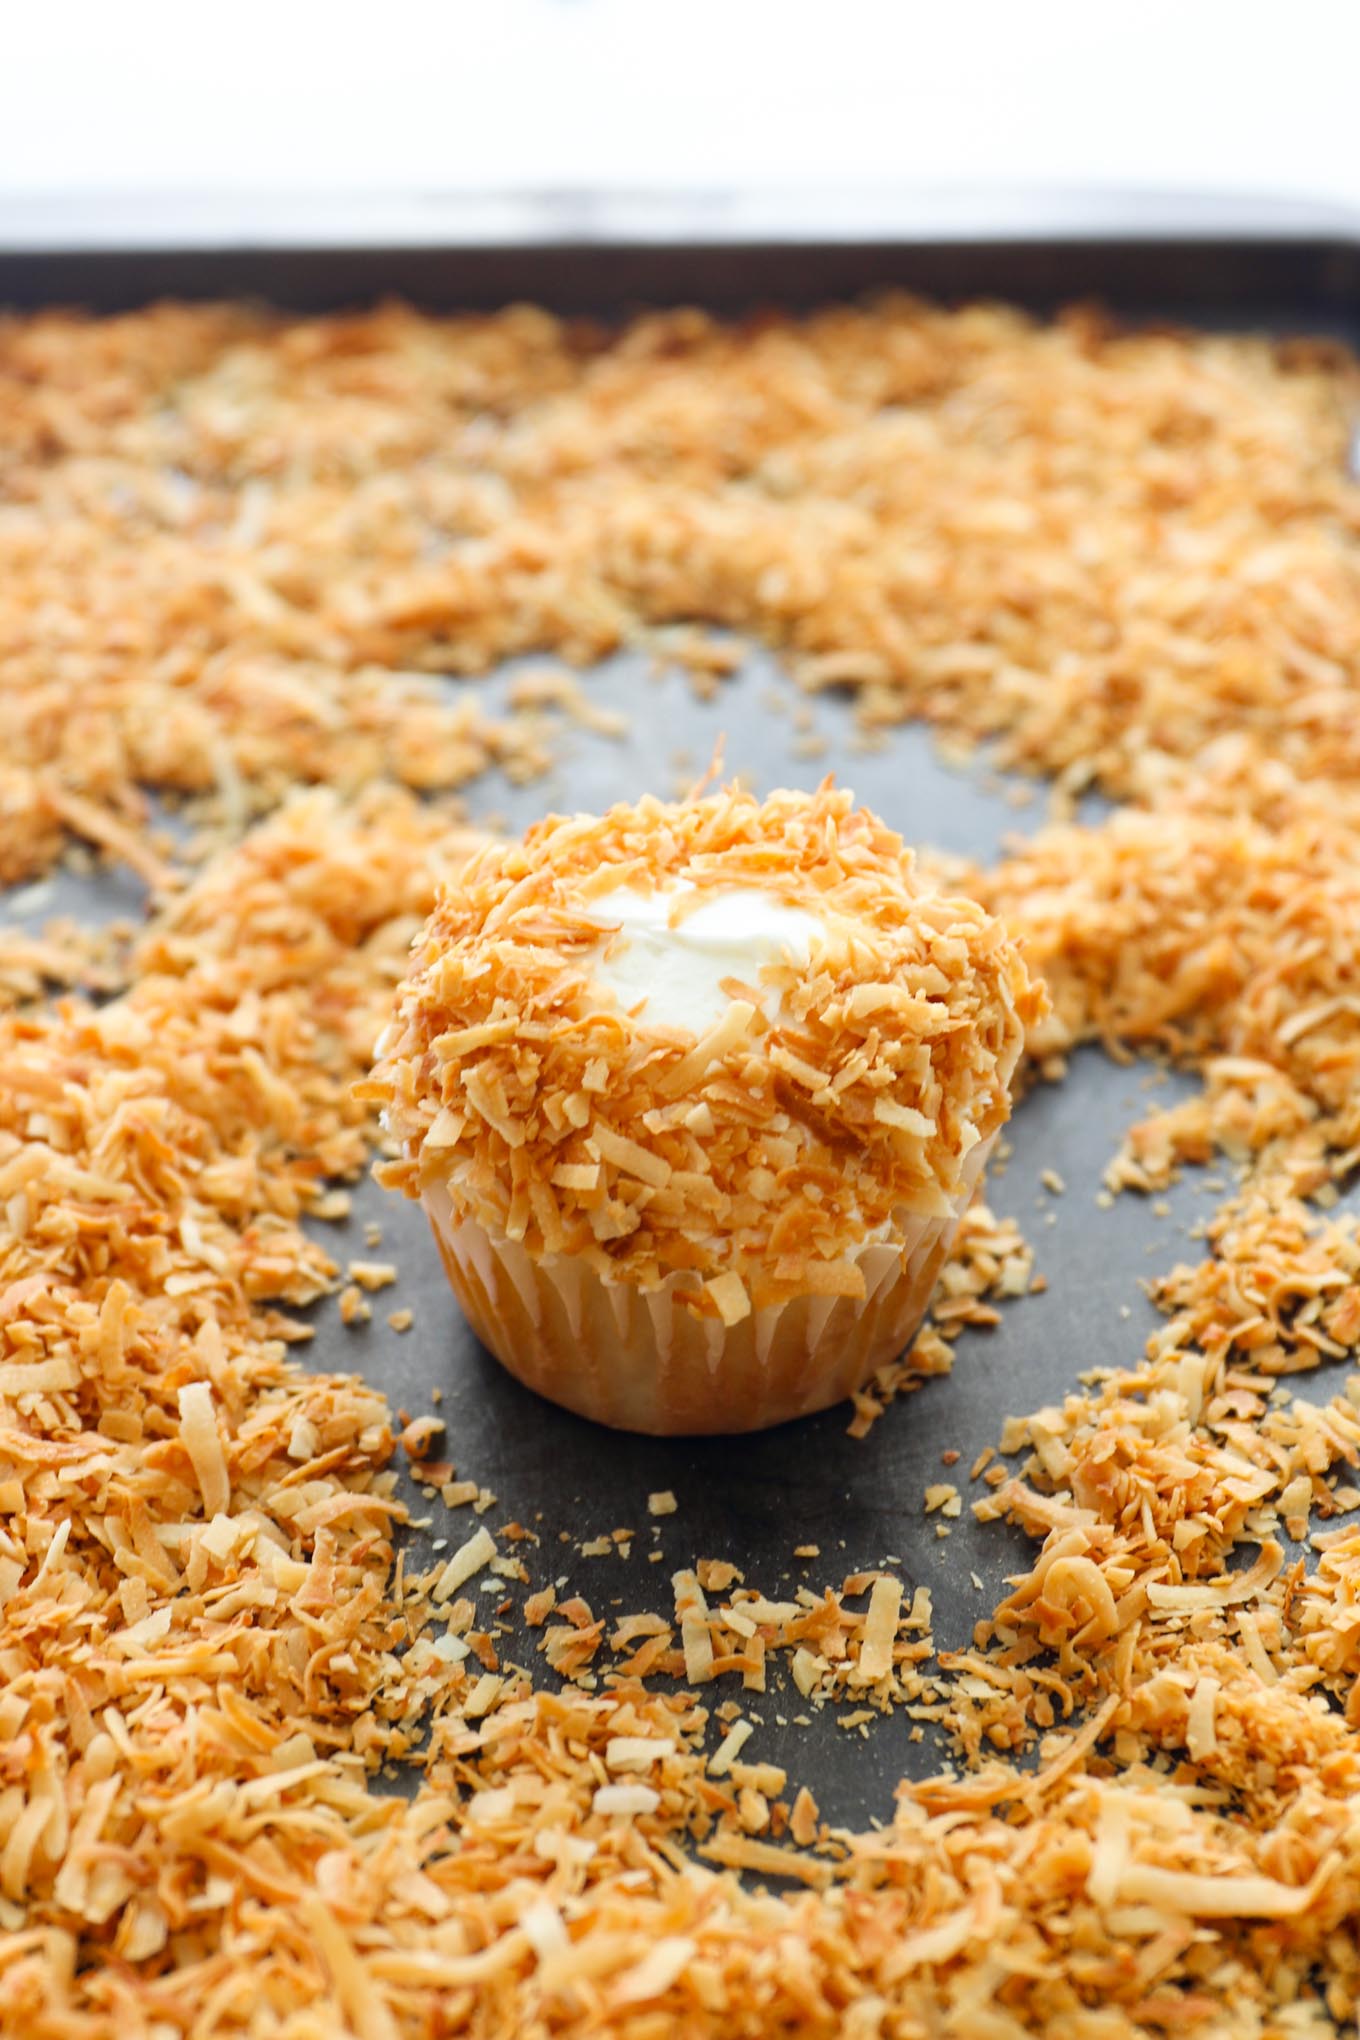 How to make birds nest cupcakes with toasted coconut